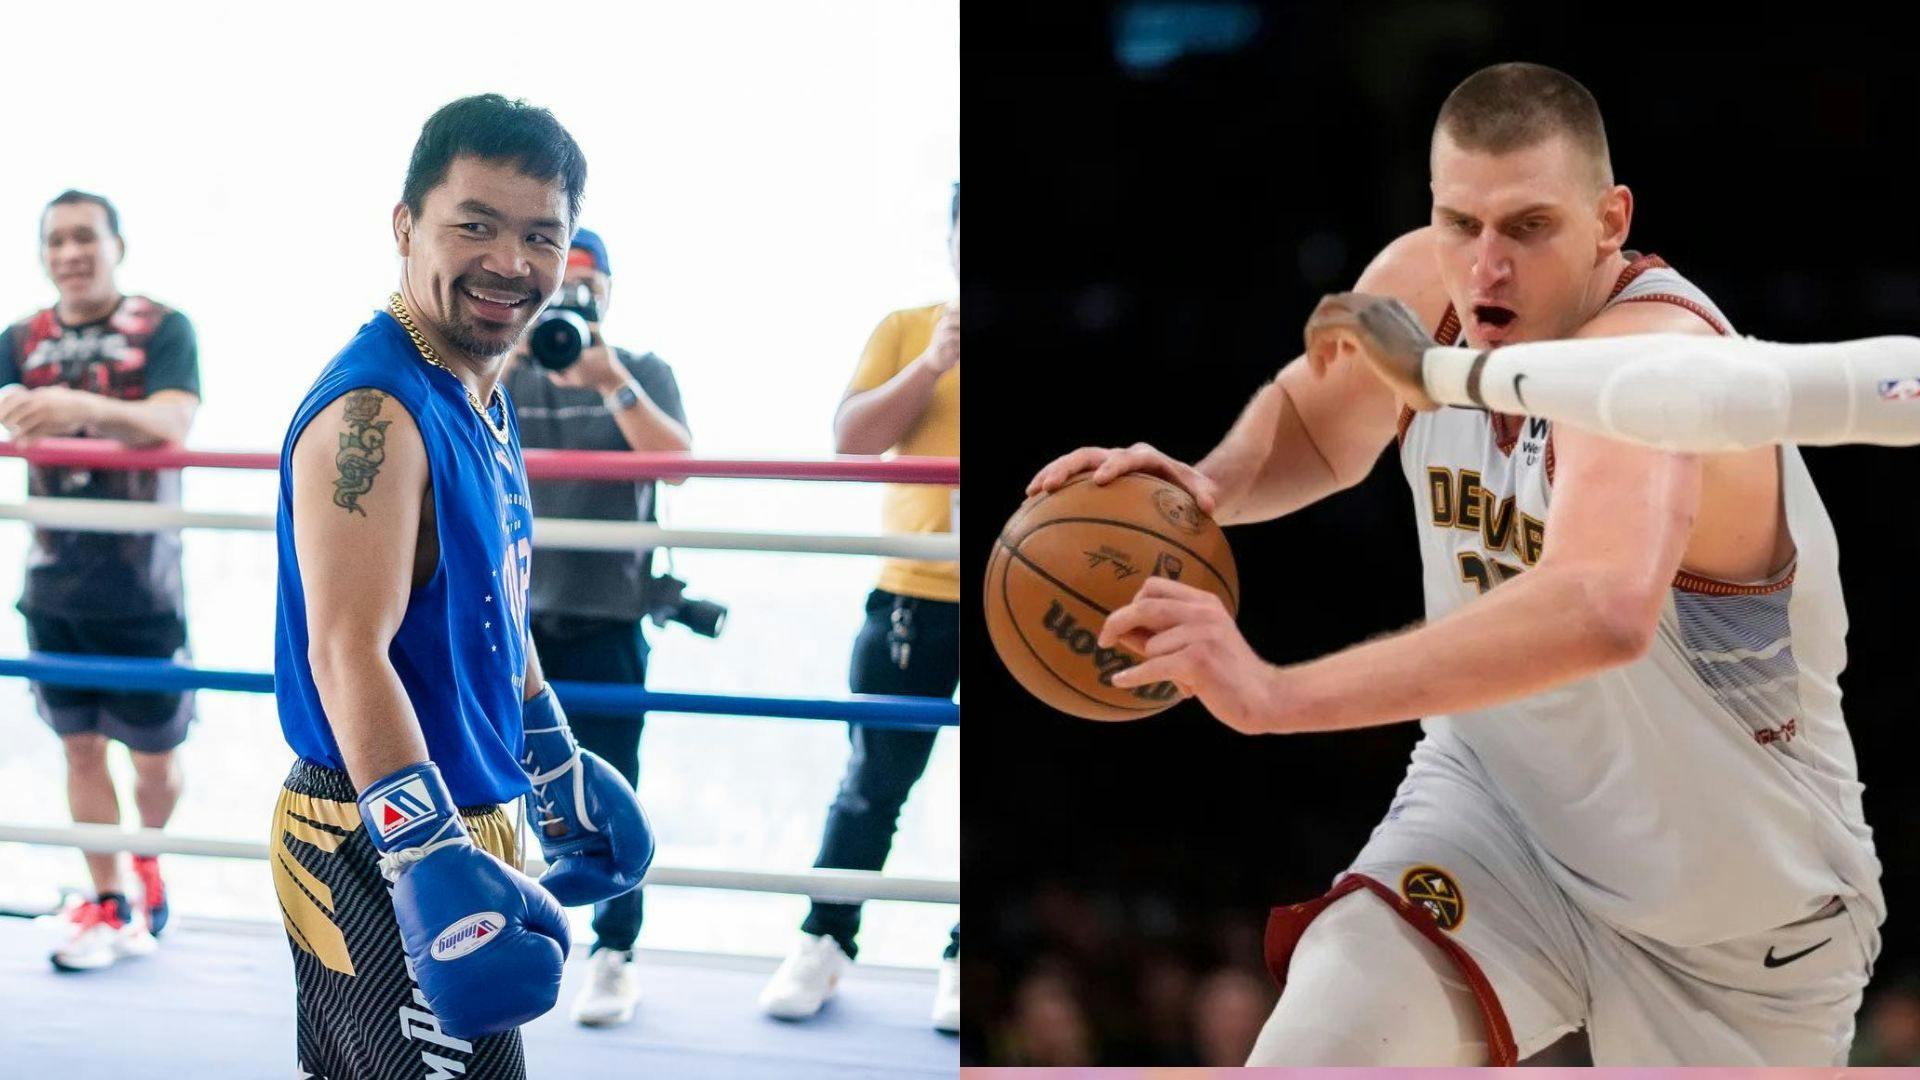 Manny Pacquiao speaks up about being compared to Nuggets star Nikola Jokic